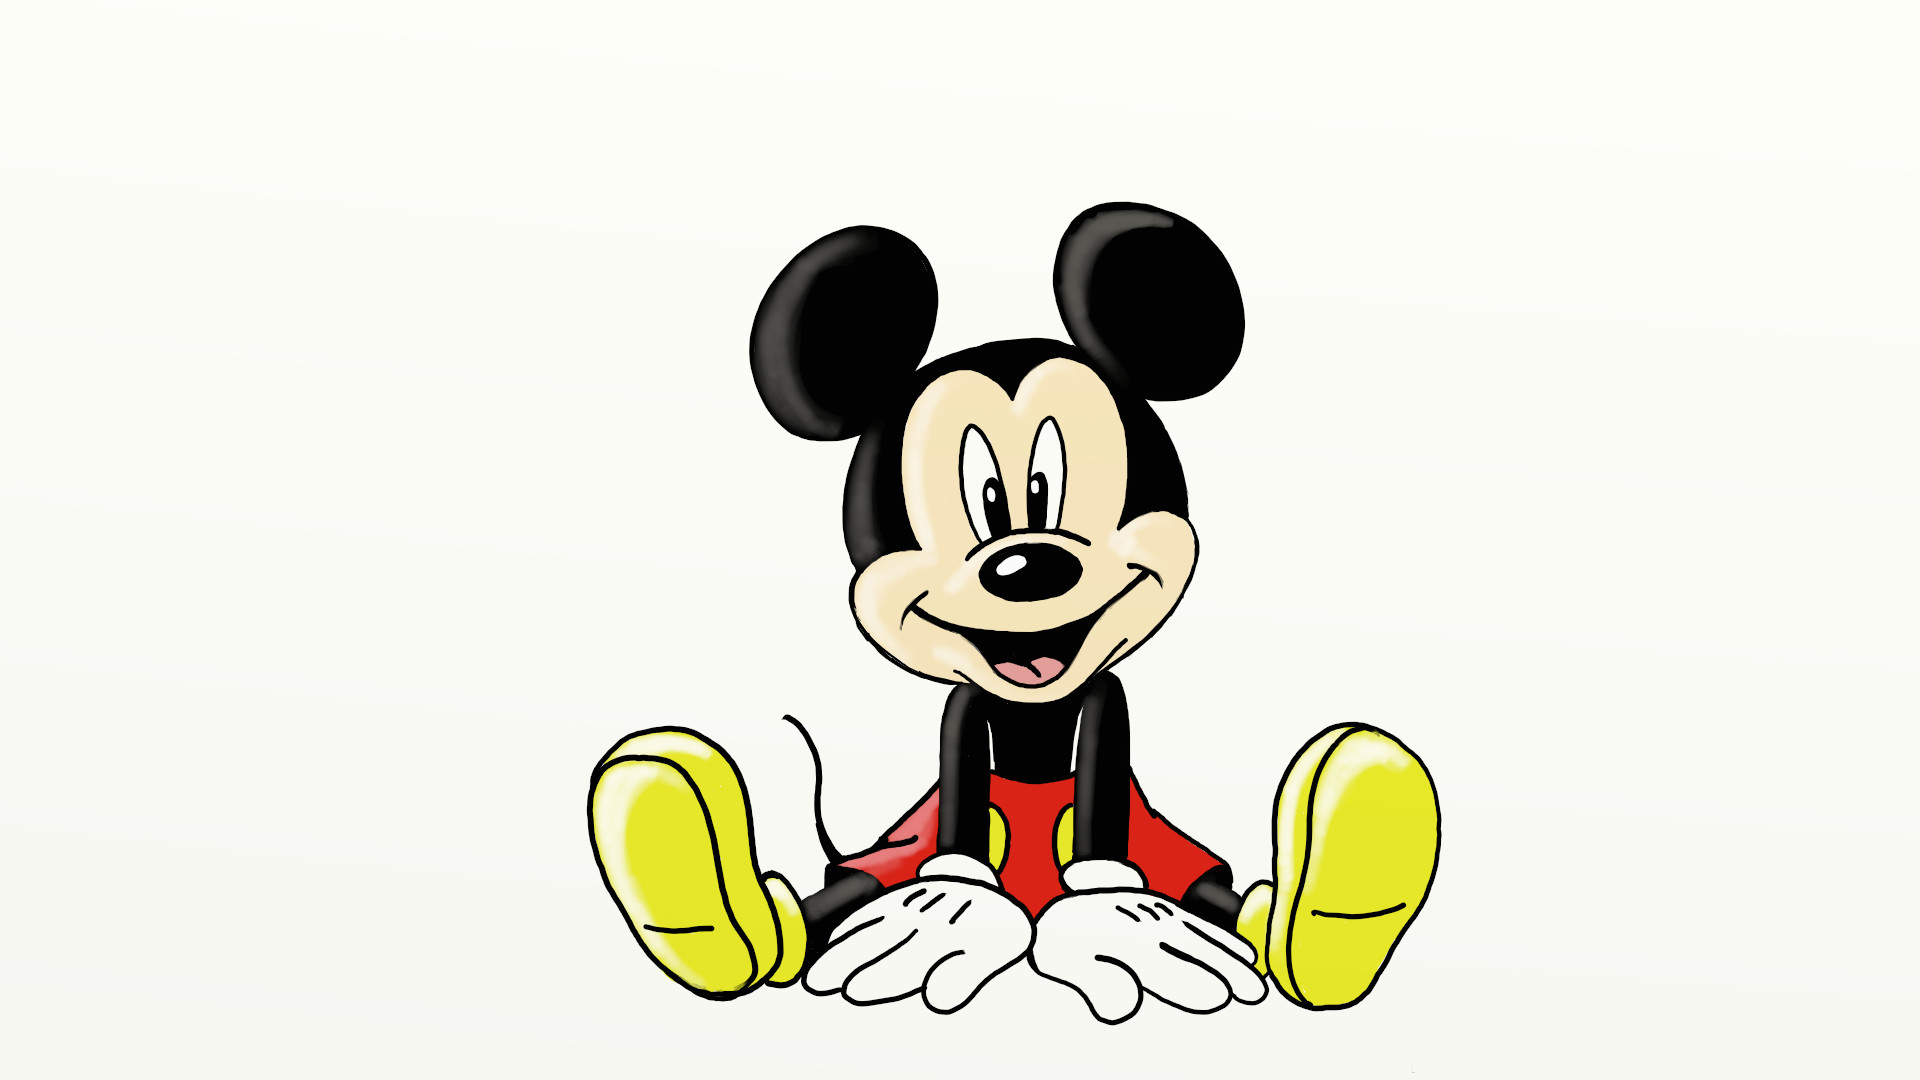 Daily Cartoon Drawings - Drawing Mickey Mouse